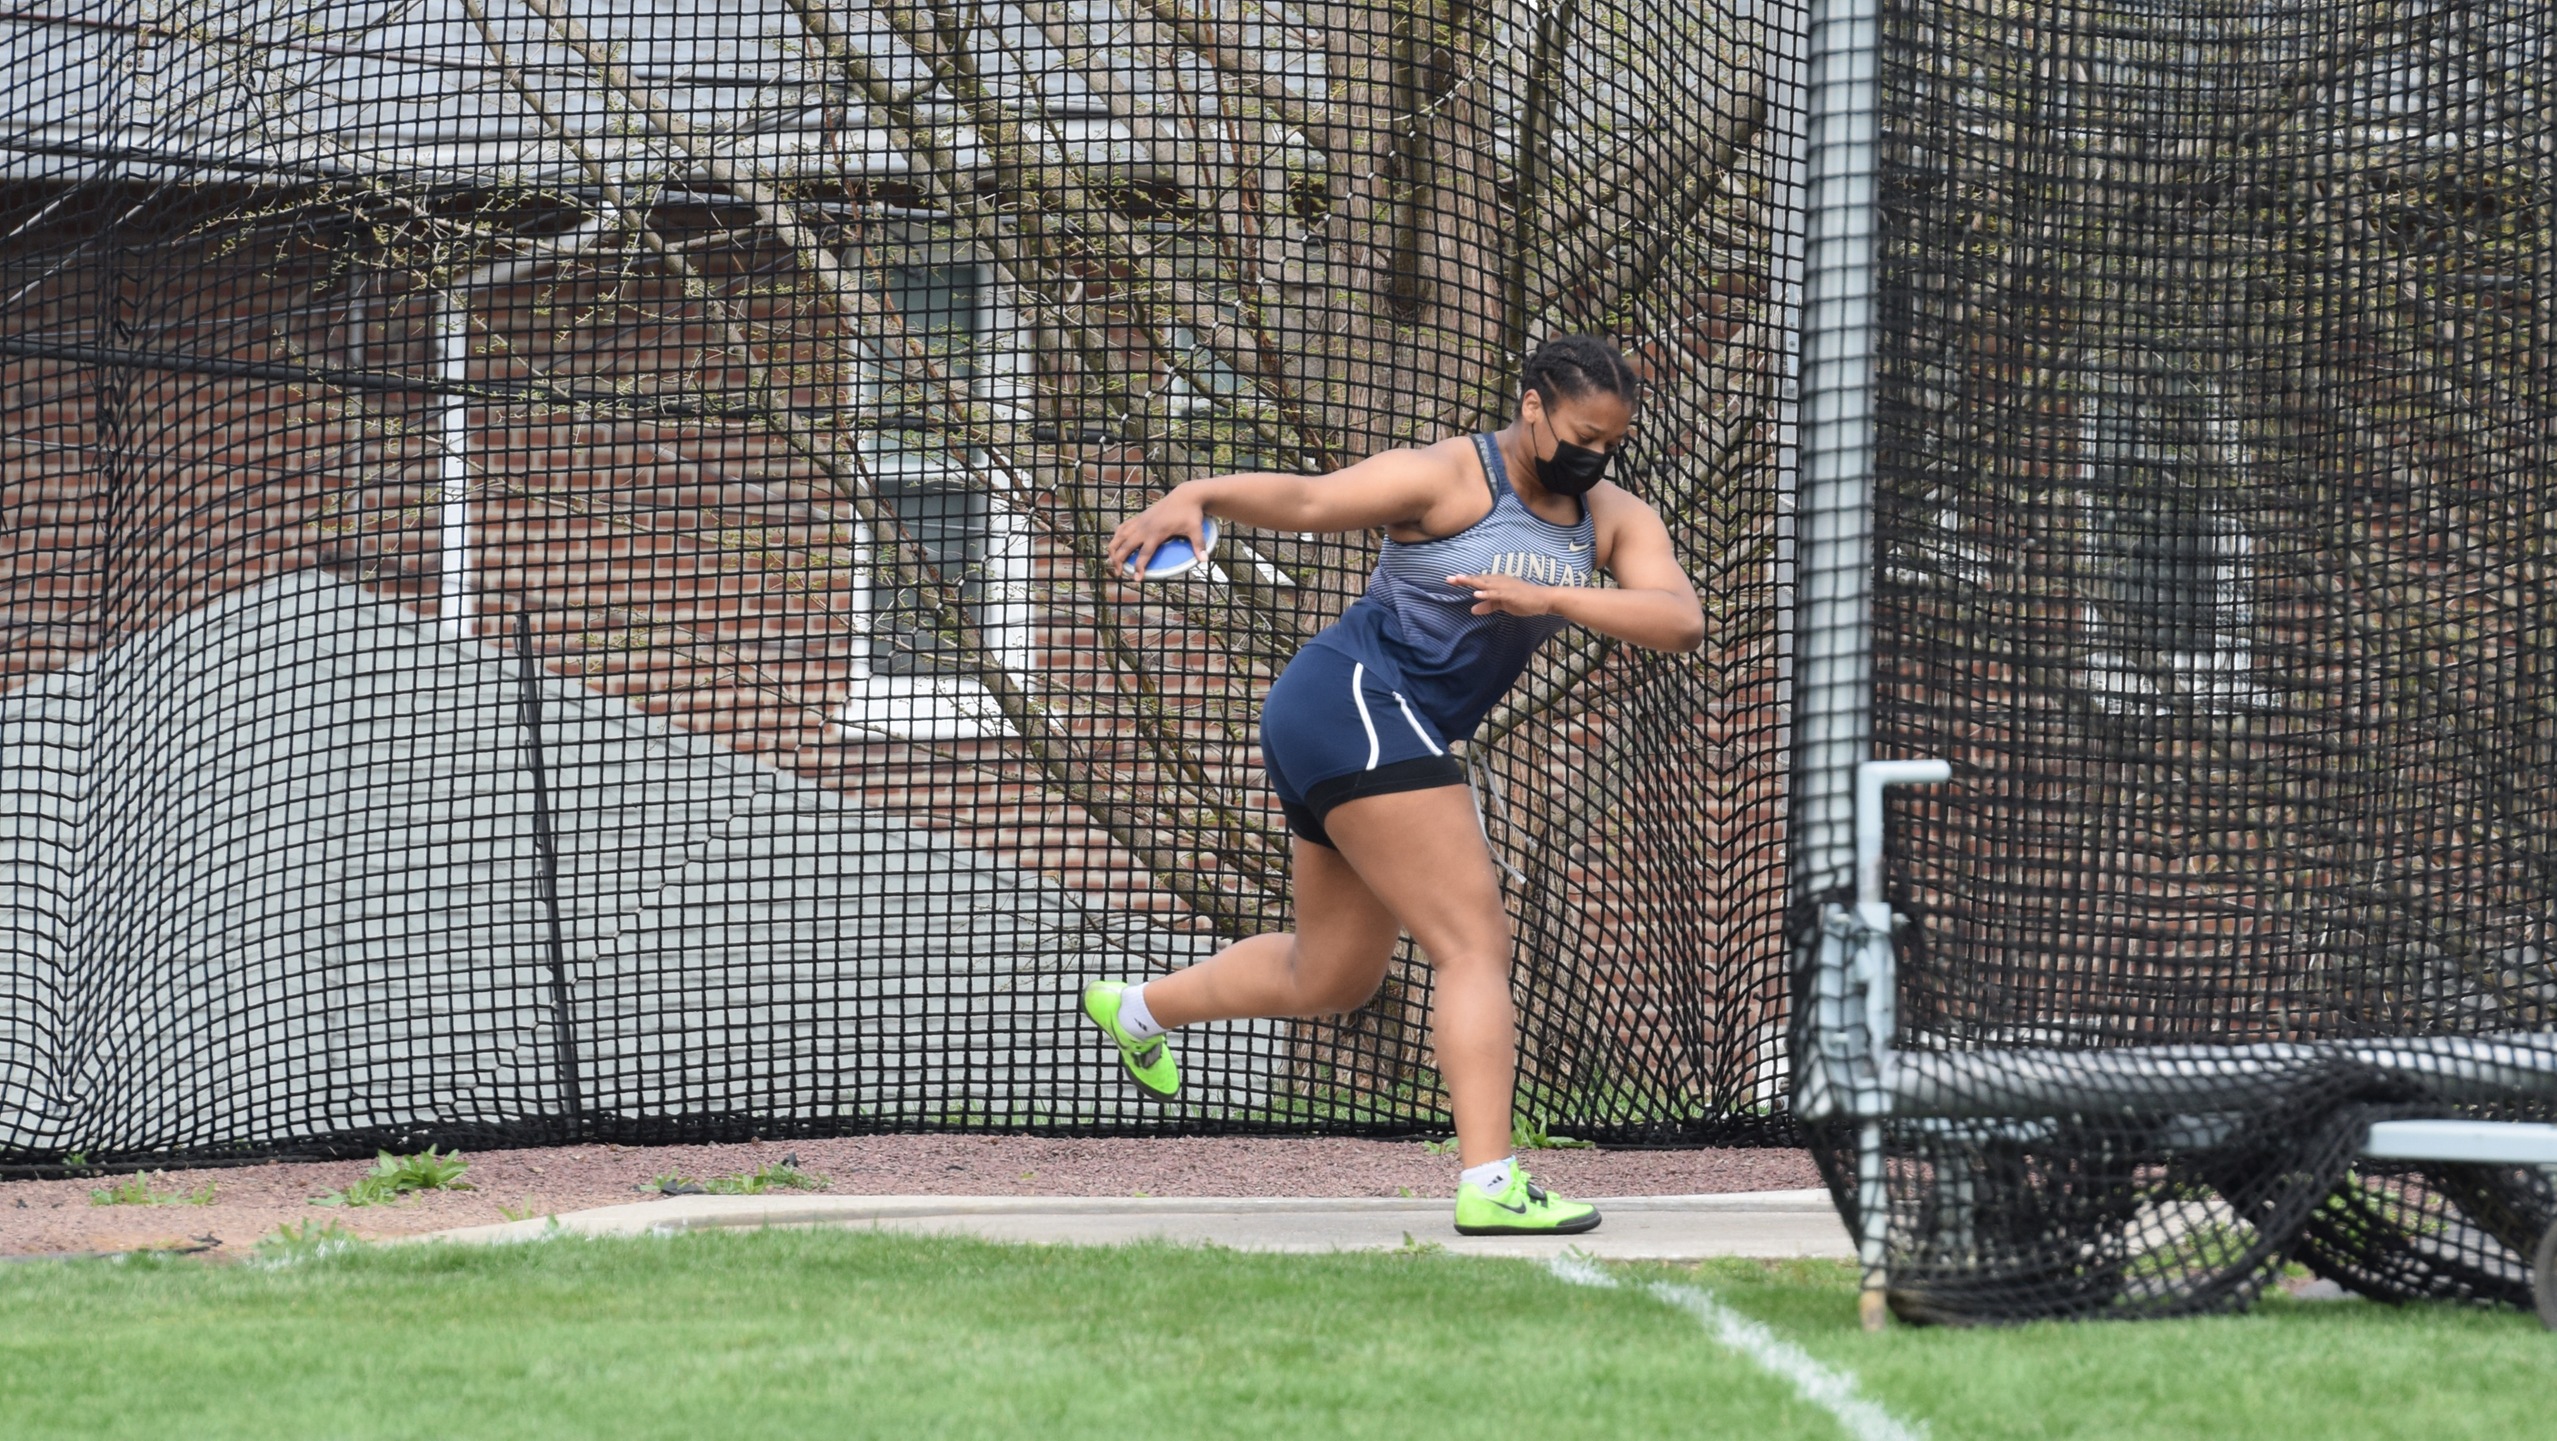 Hahn Breaks JC Discus Record at Moravian Greyhound Invitational